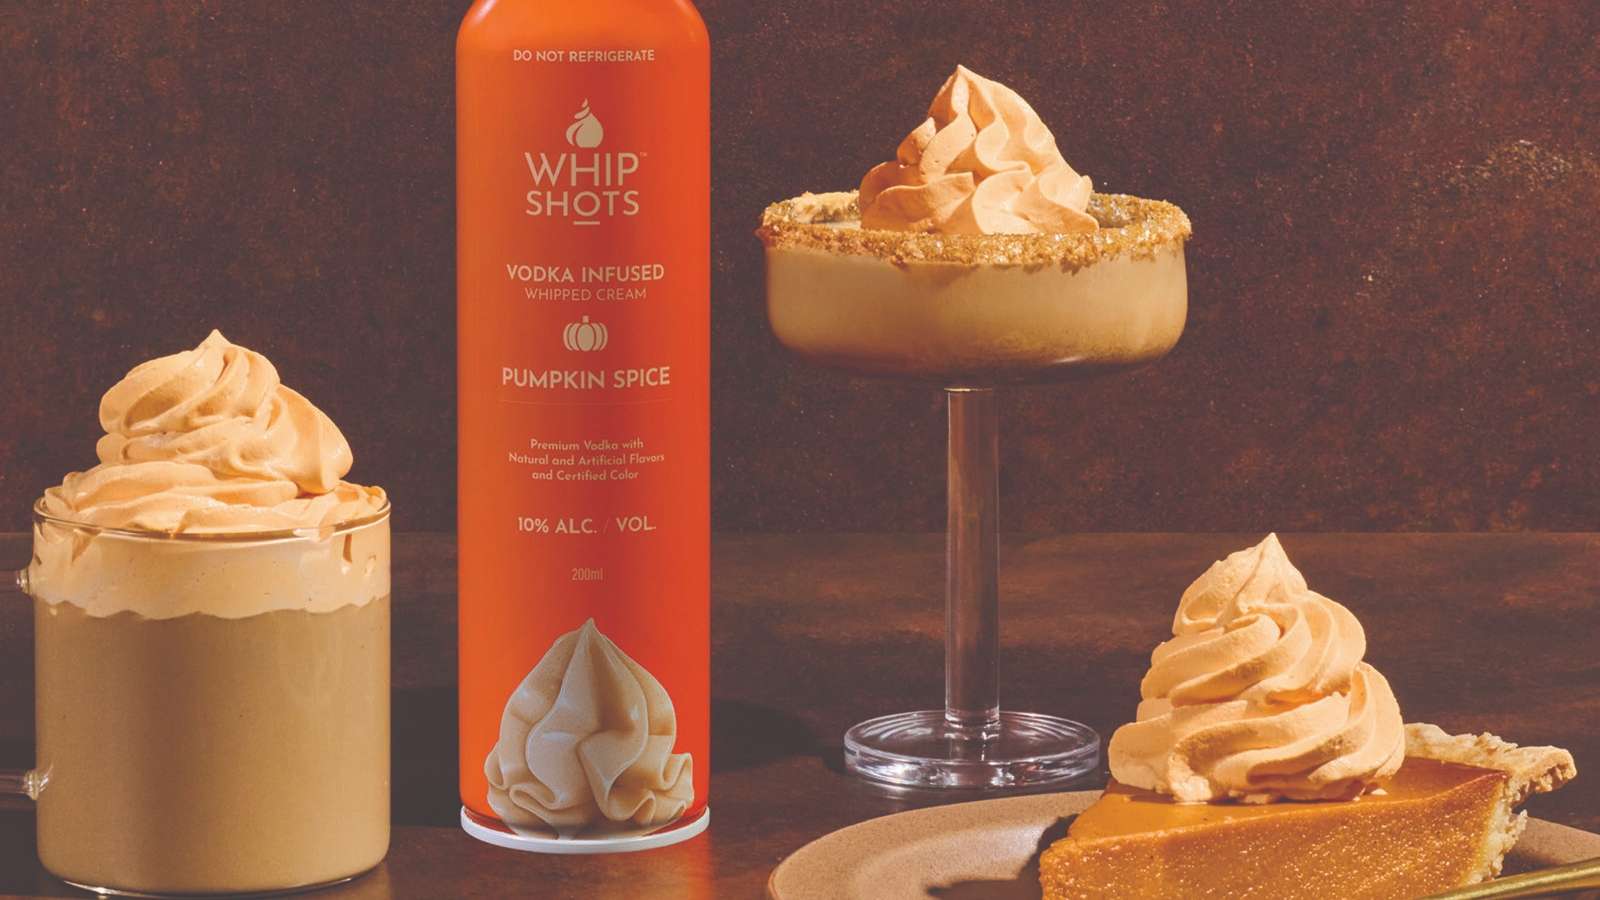 The image shows Cardi B's new Pumpkin Spice flavor whipped cream.